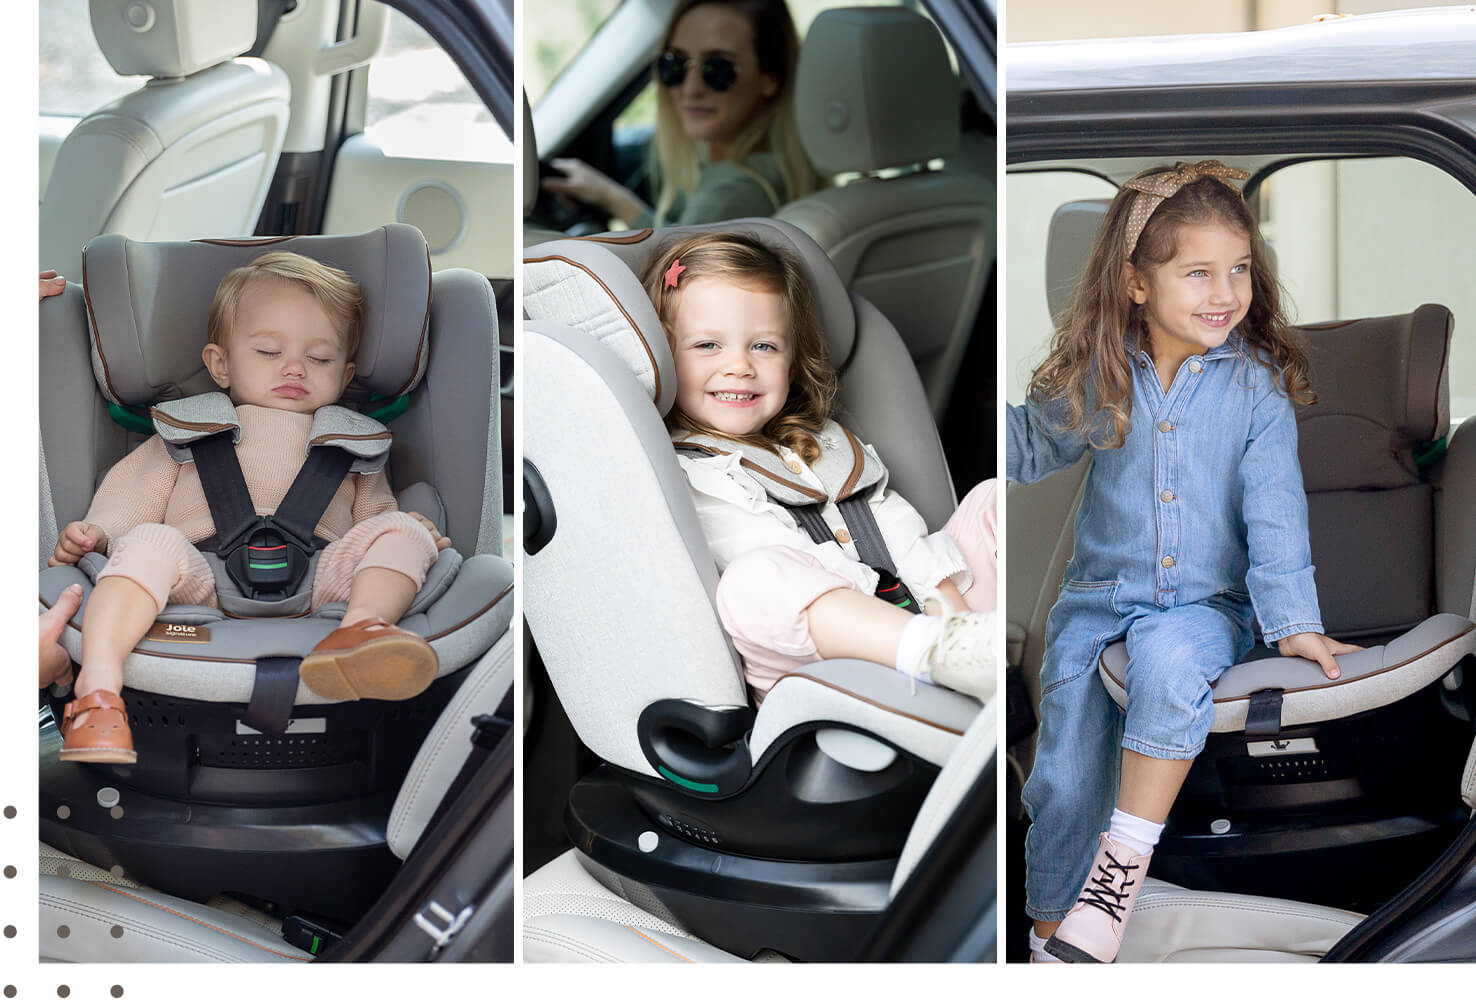 3 side by side images of young girls in the i-Spin Grow car seat: baby, toddler, and child.